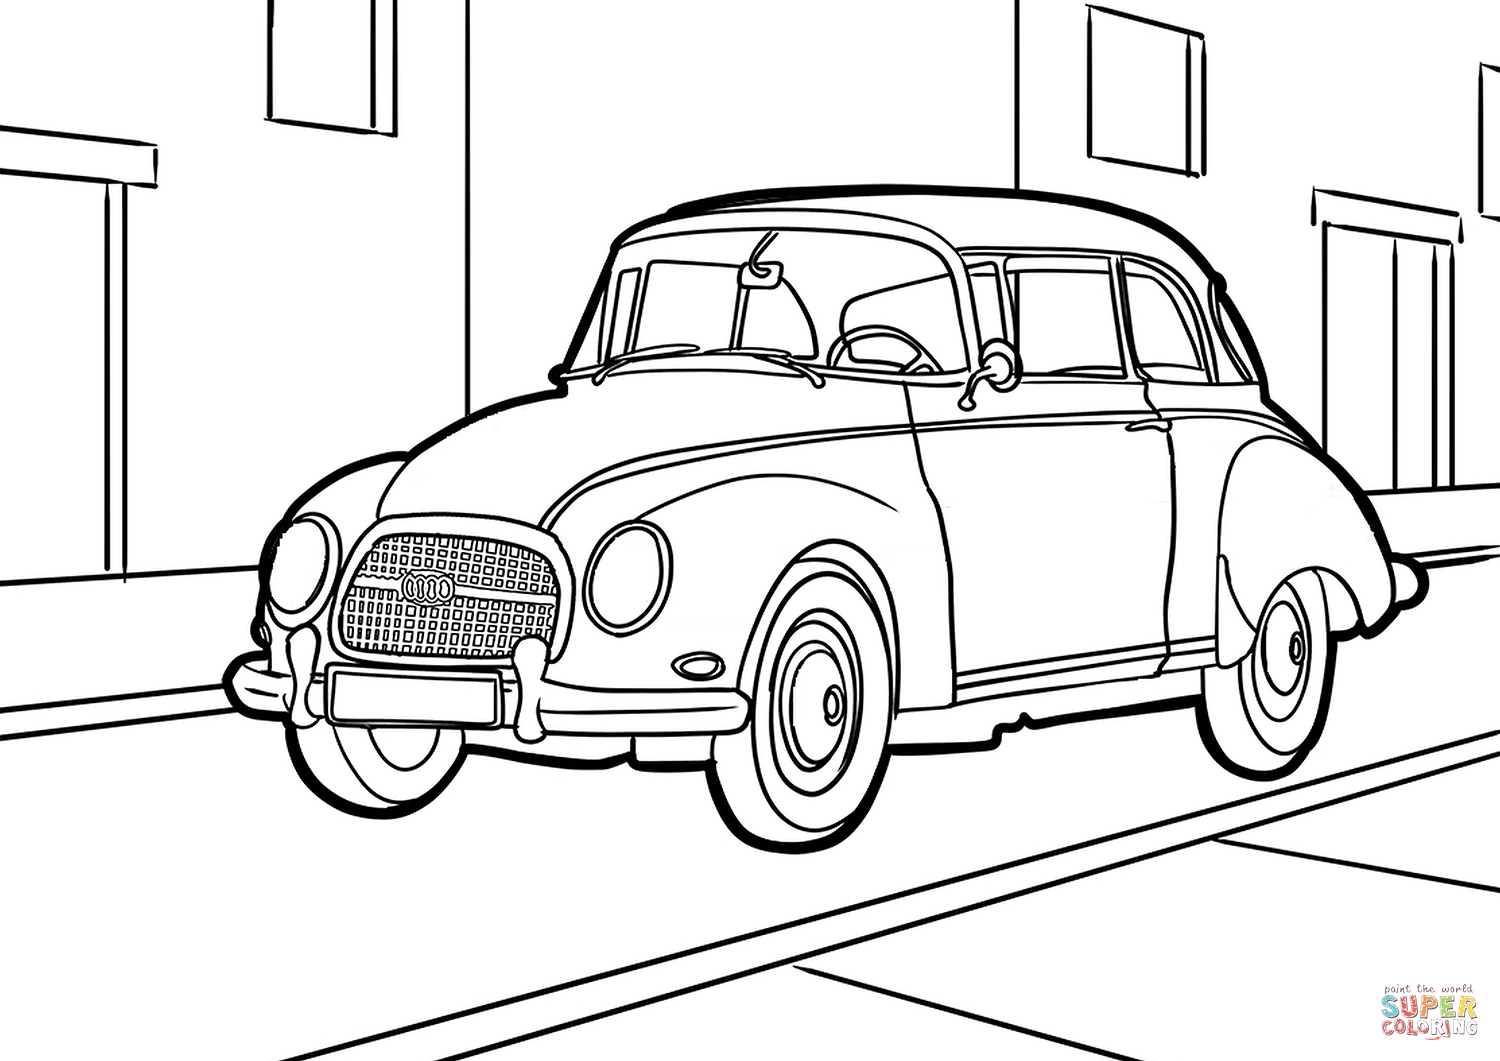 Retro car coloring page free printable coloring pages